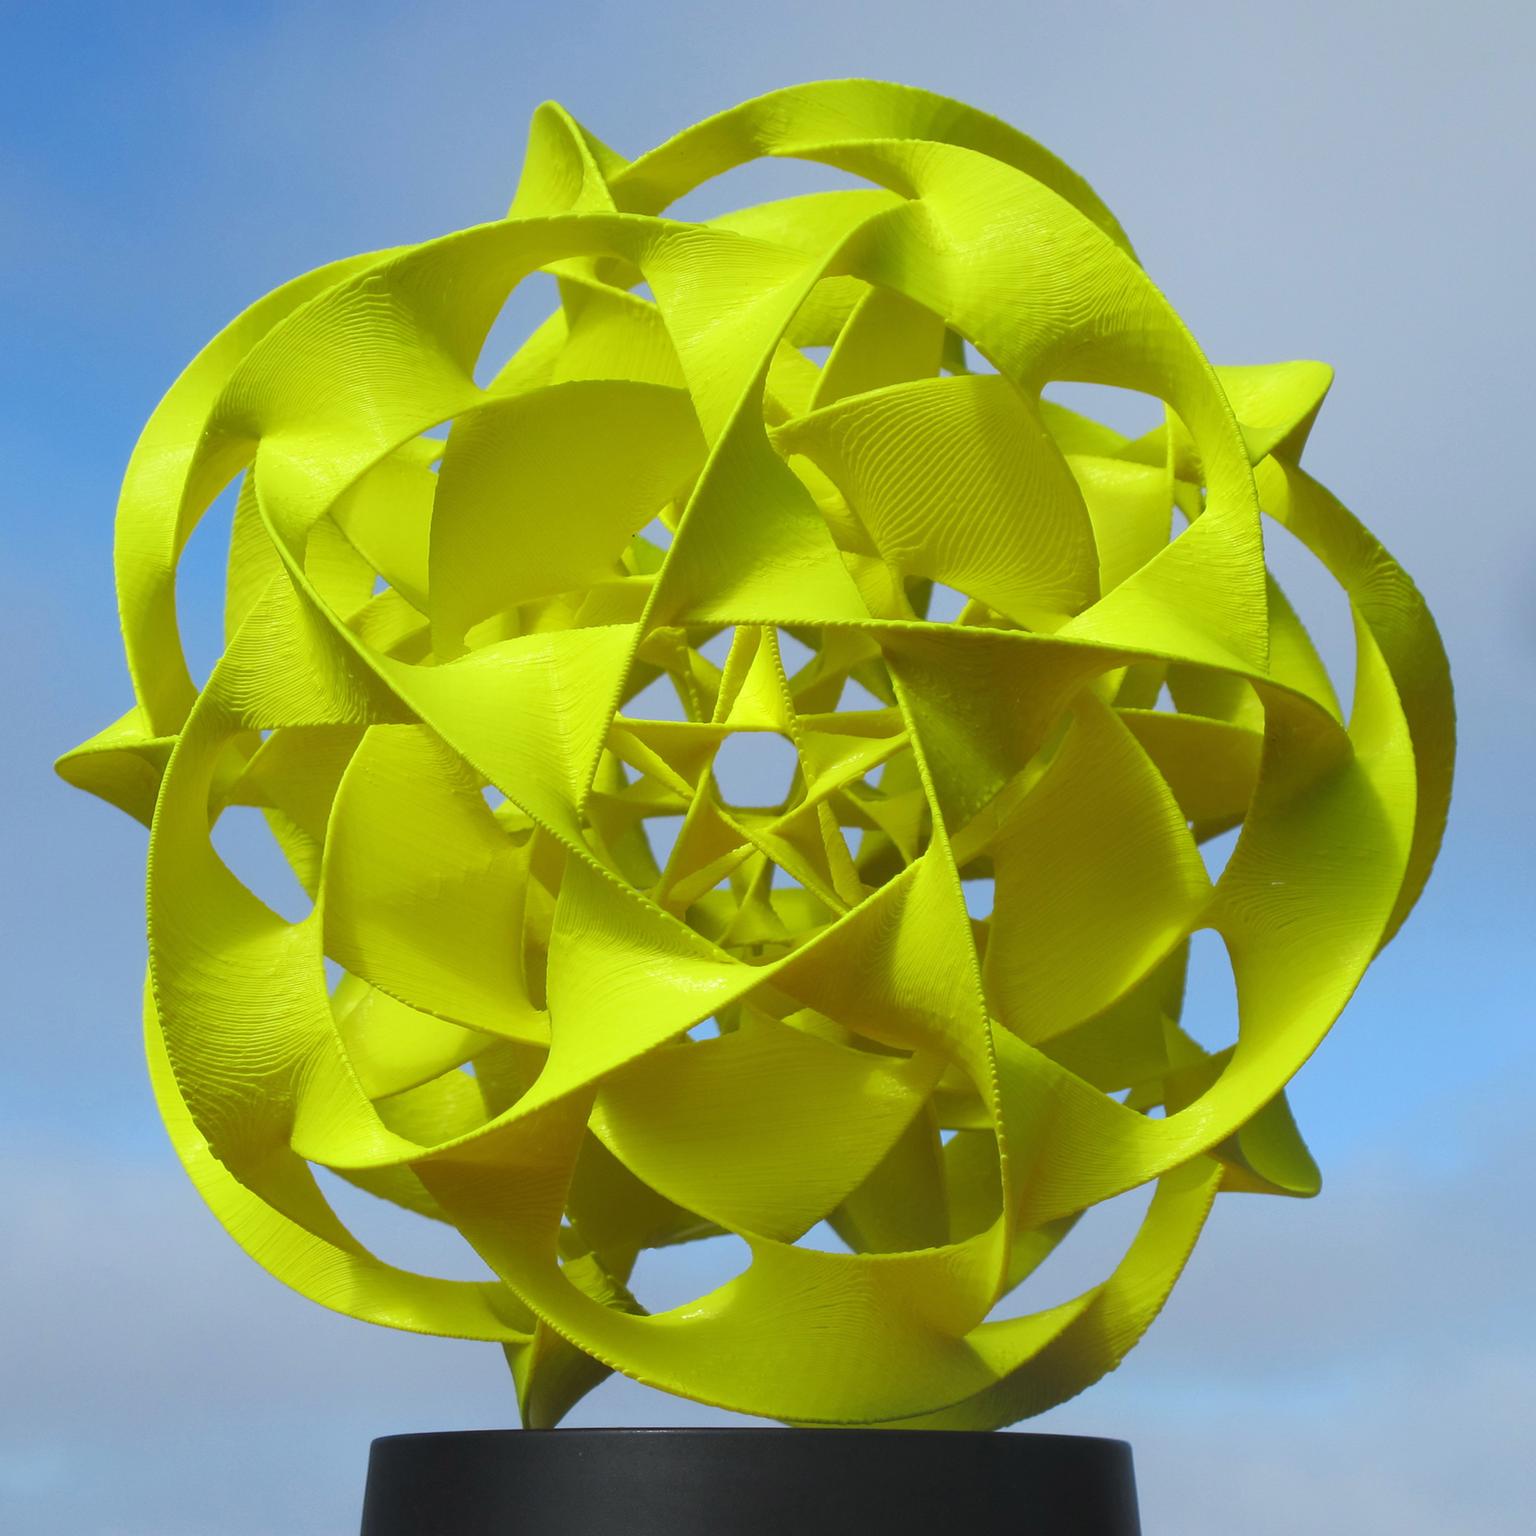 Image for entry 'Three-level Icosahedral Star Cinder'